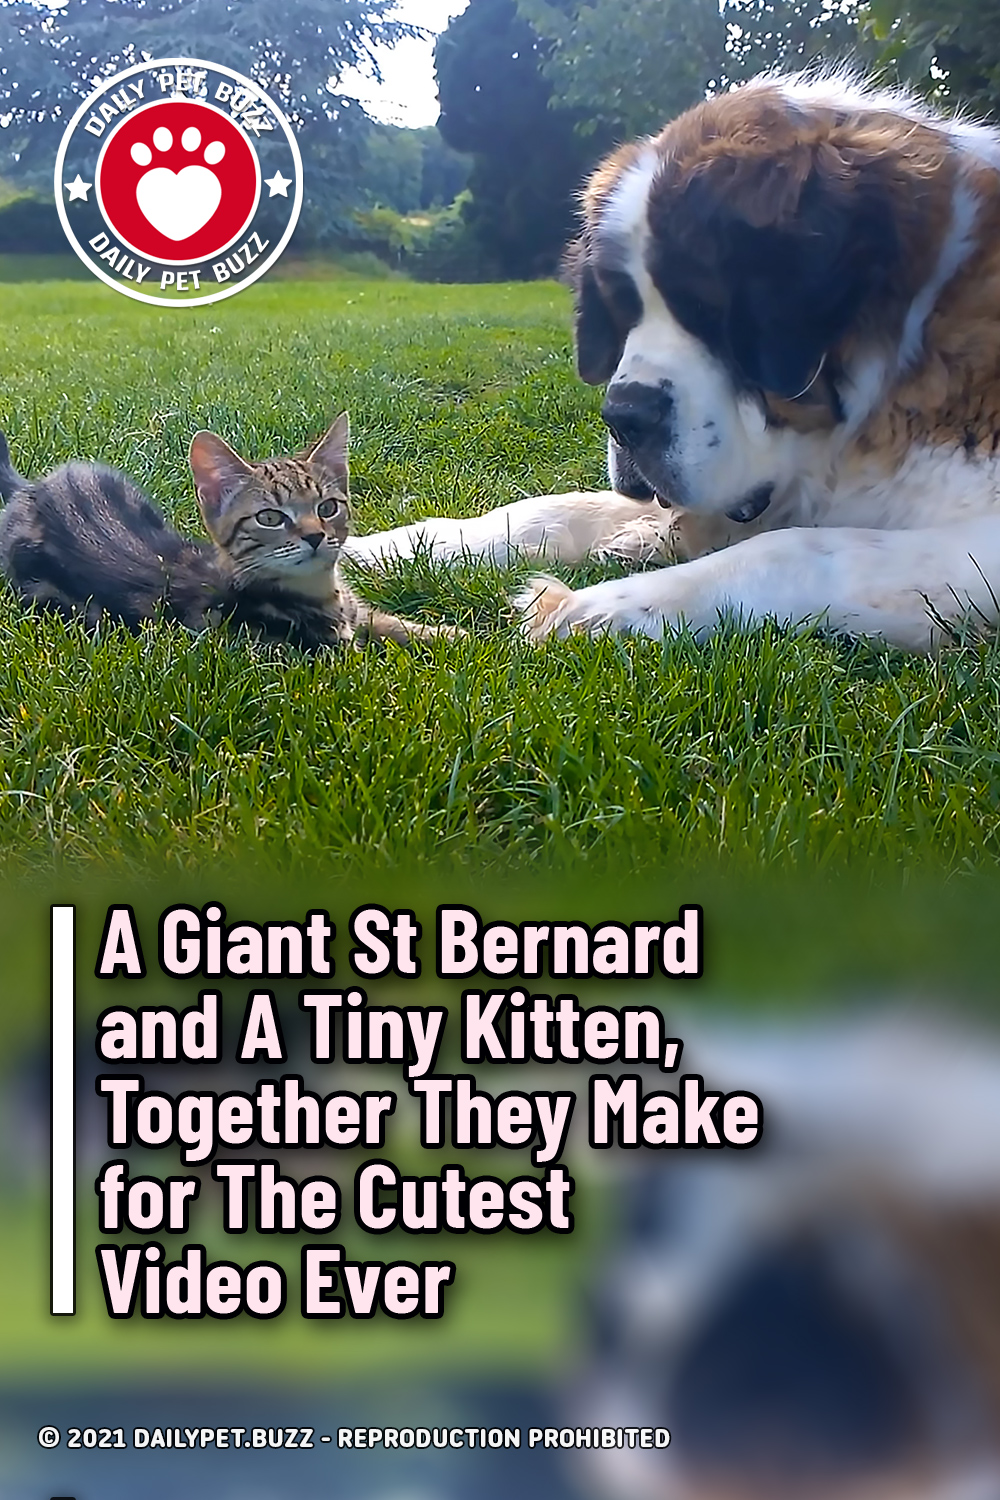 A Giant St Bernard and A Tiny Kitten, Together They Make for The Cutest Video Ever